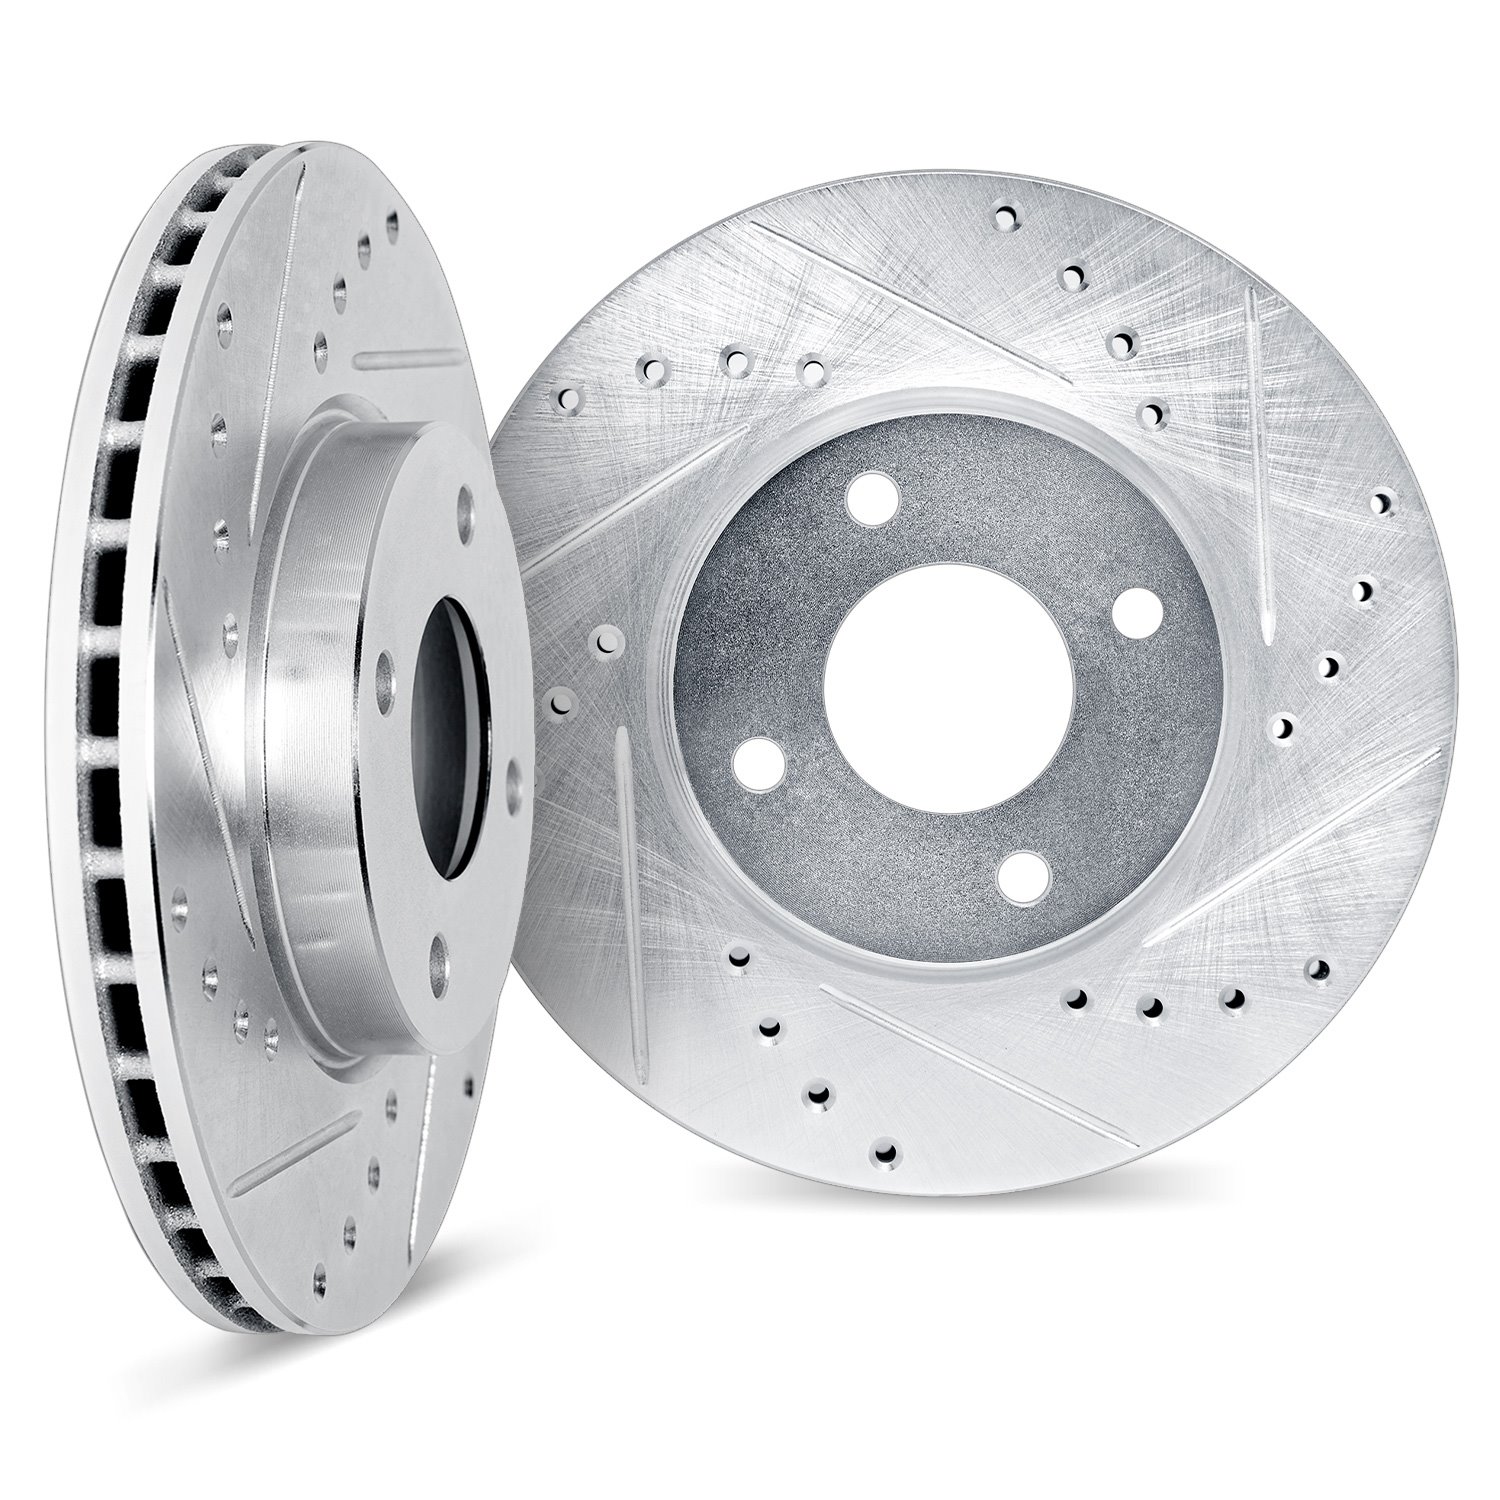 7002-01003 Drilled/Slotted Brake Rotors [Silver], 1999-2007 Suzuki, Position: Front